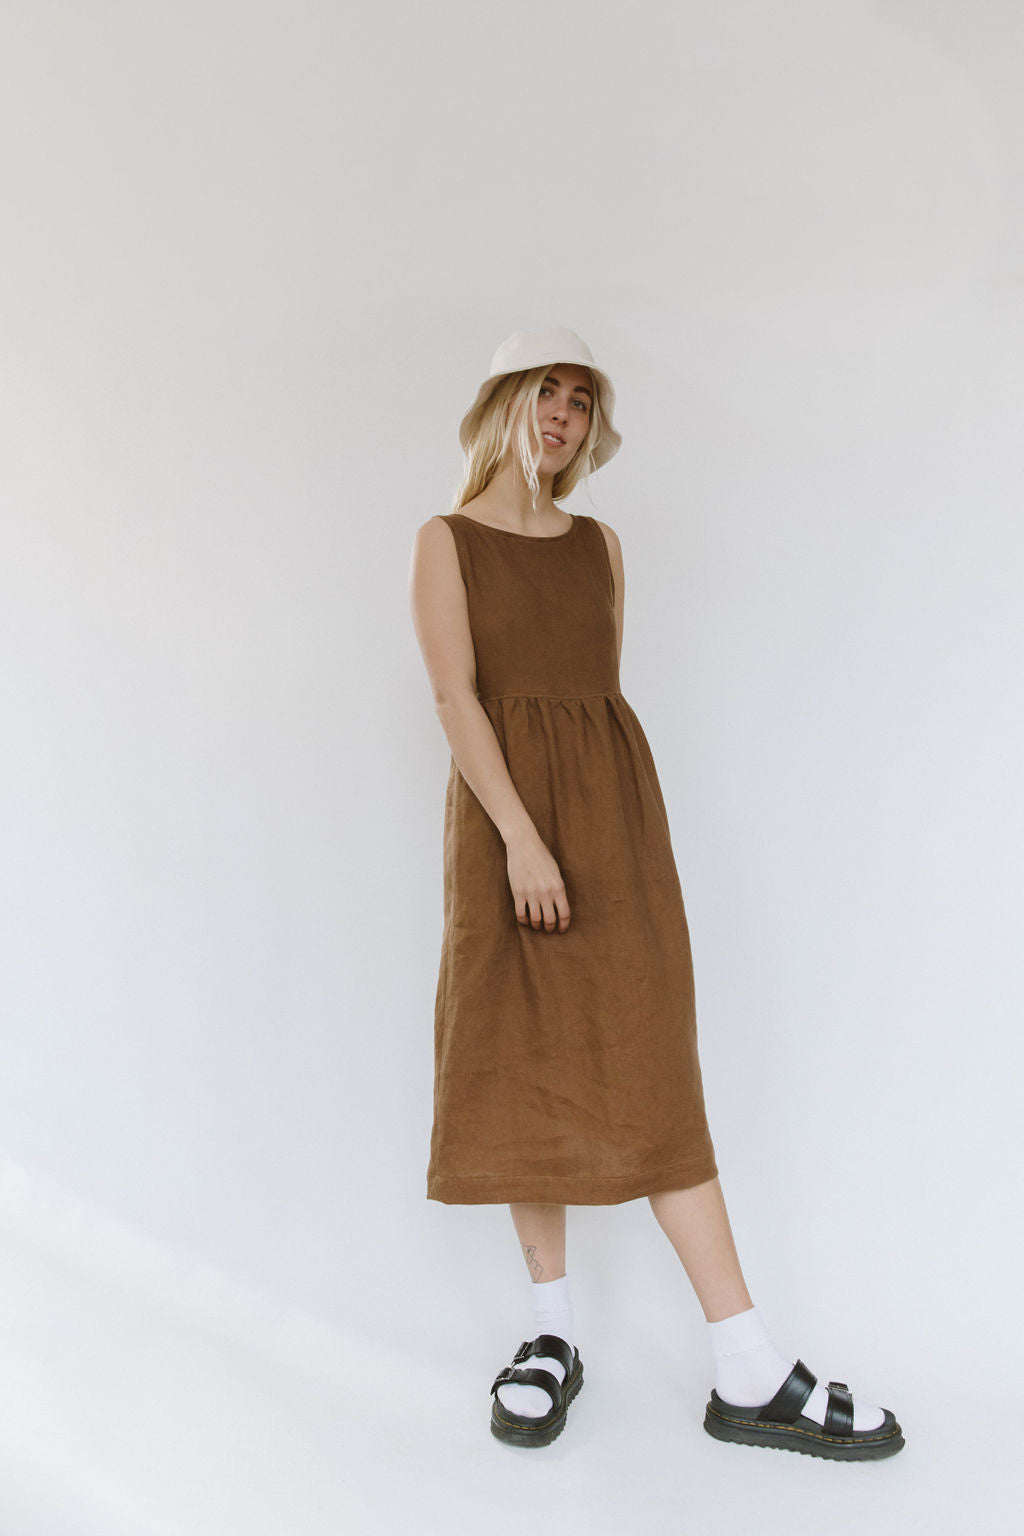 THE SONORA DRESS